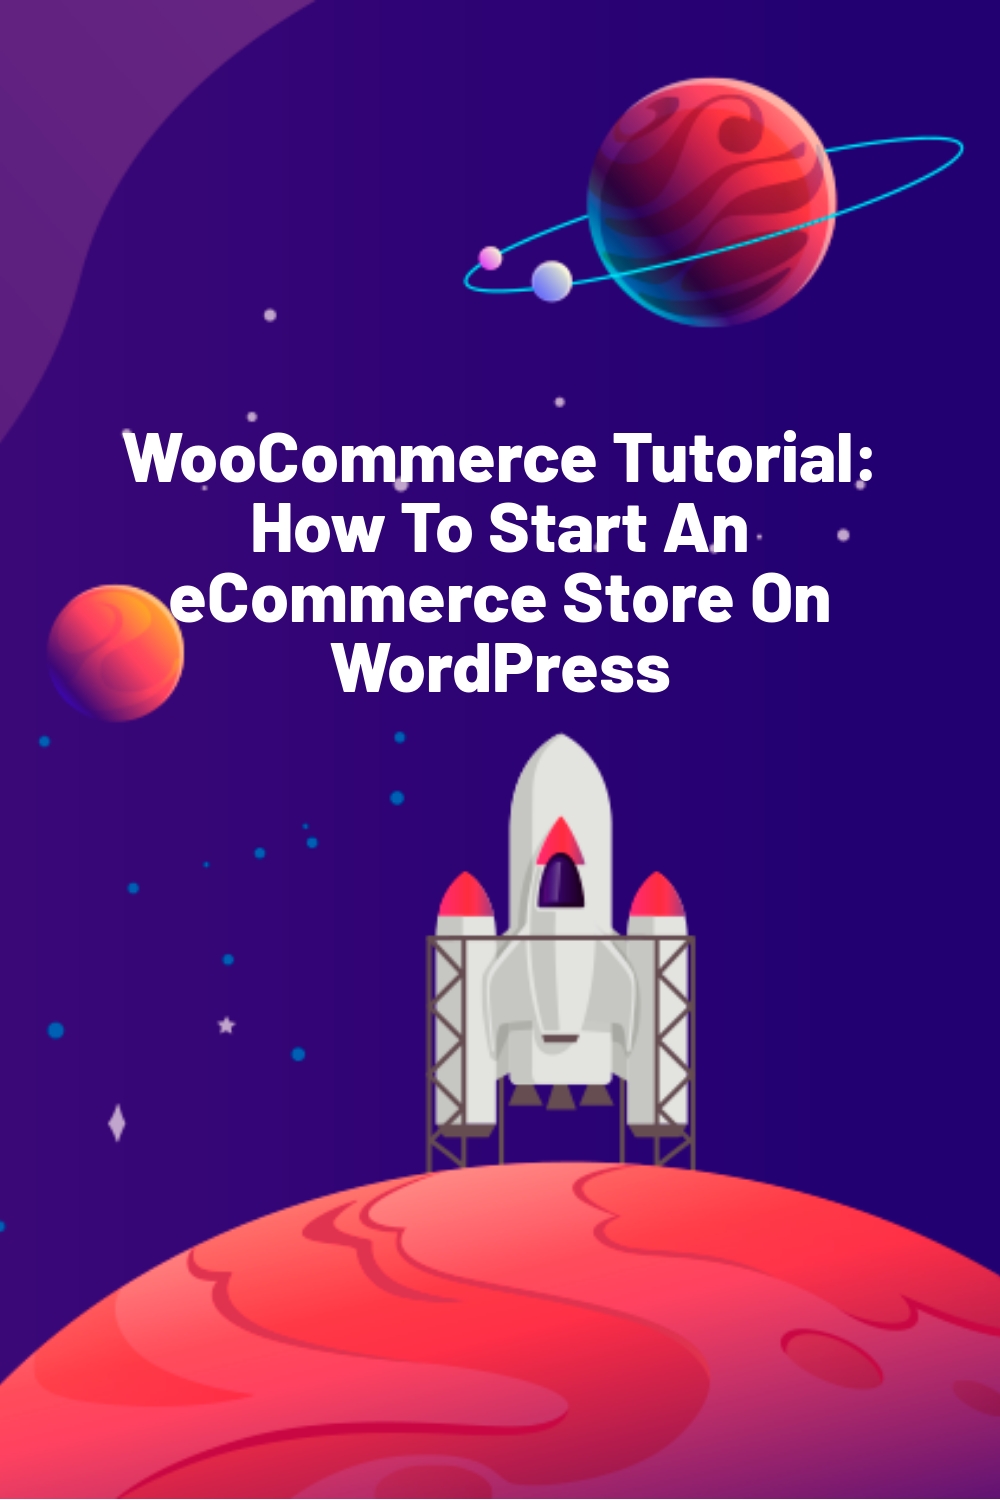 WooCommerce Tutorial: How To Start An eCommerce Store On WordPress